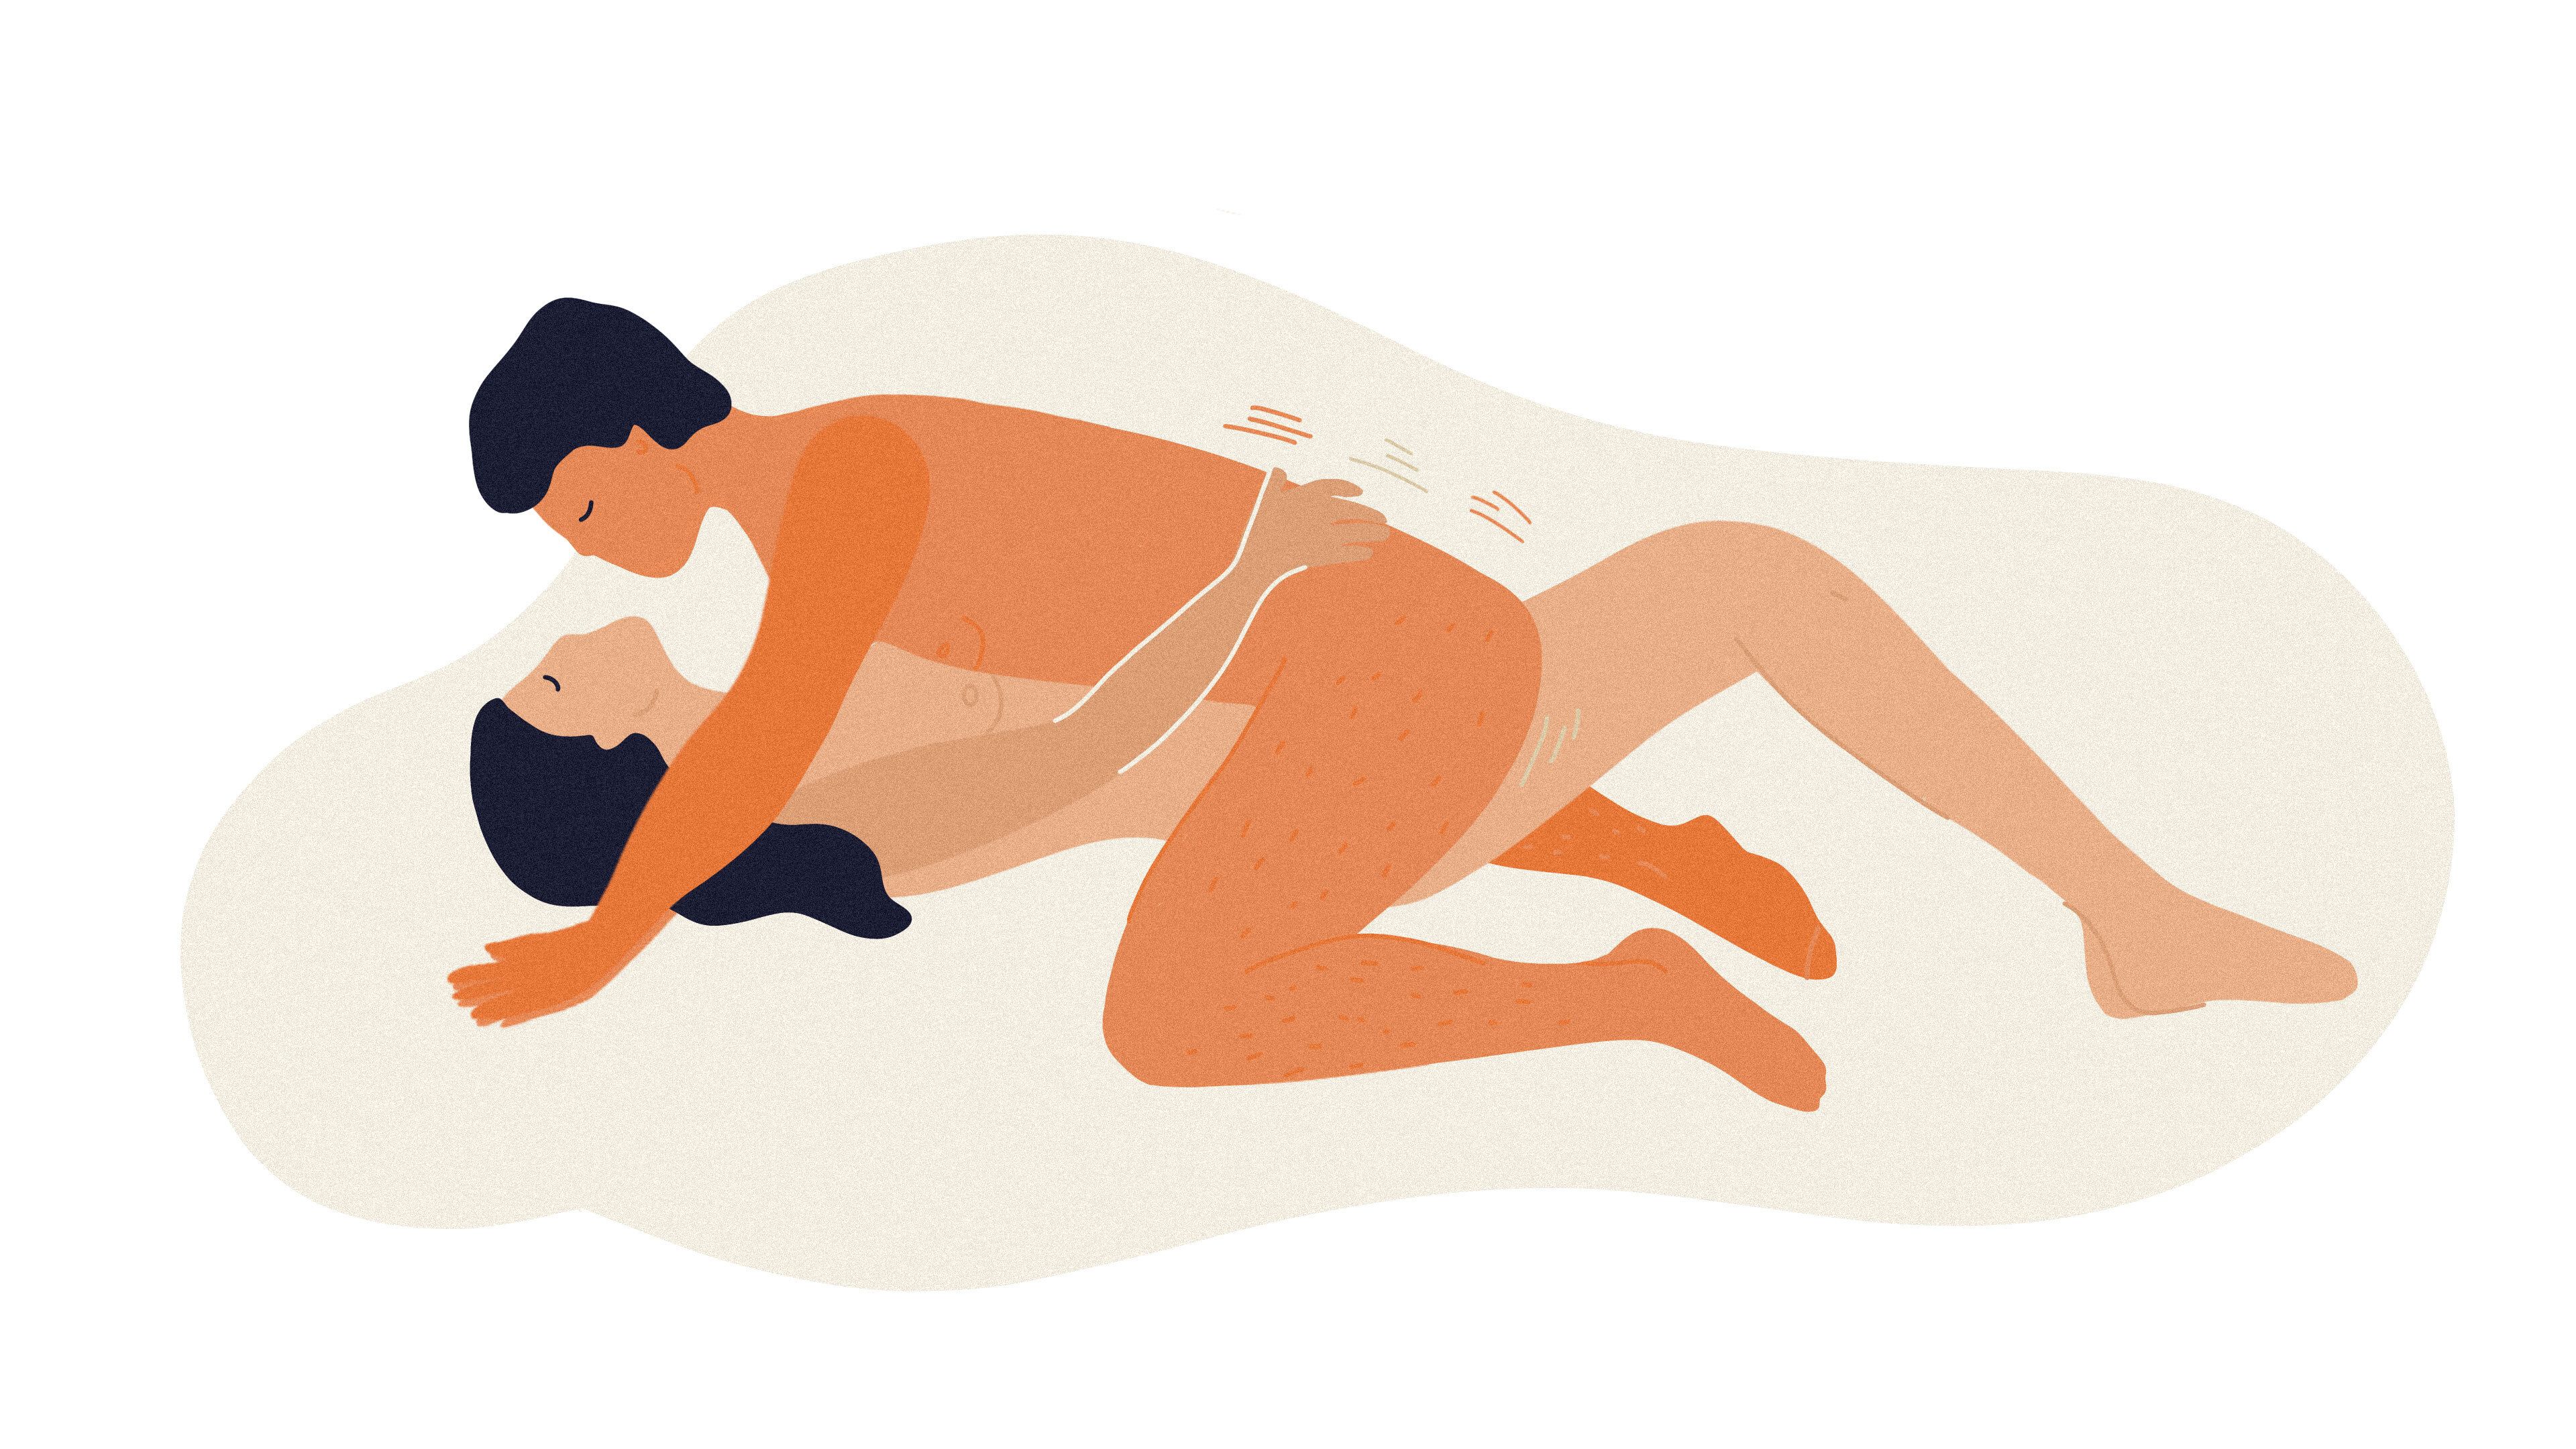 18 Missionary Sex Positions image